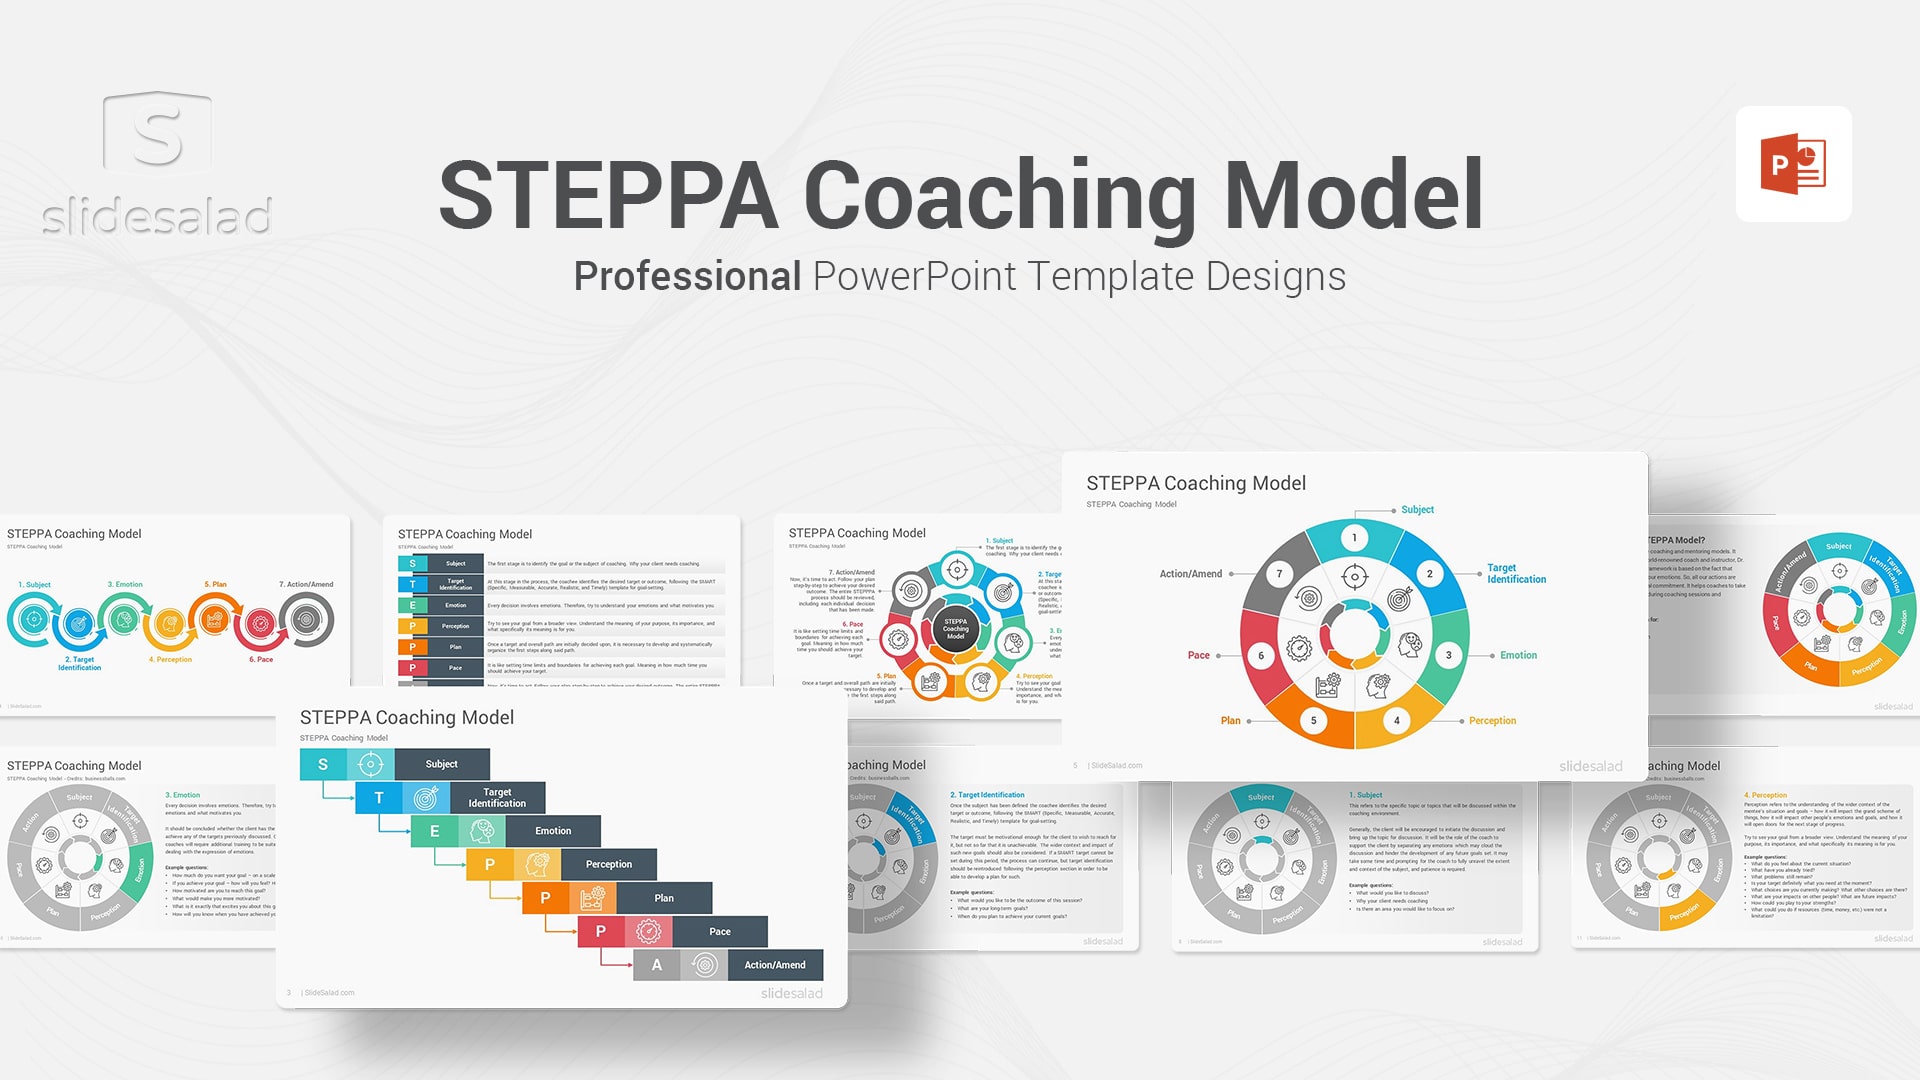 STEPPA Coaching Model PowerPoint Template - Premium Presentation Examples to Present a Topic About the STEPPA Coaching Model